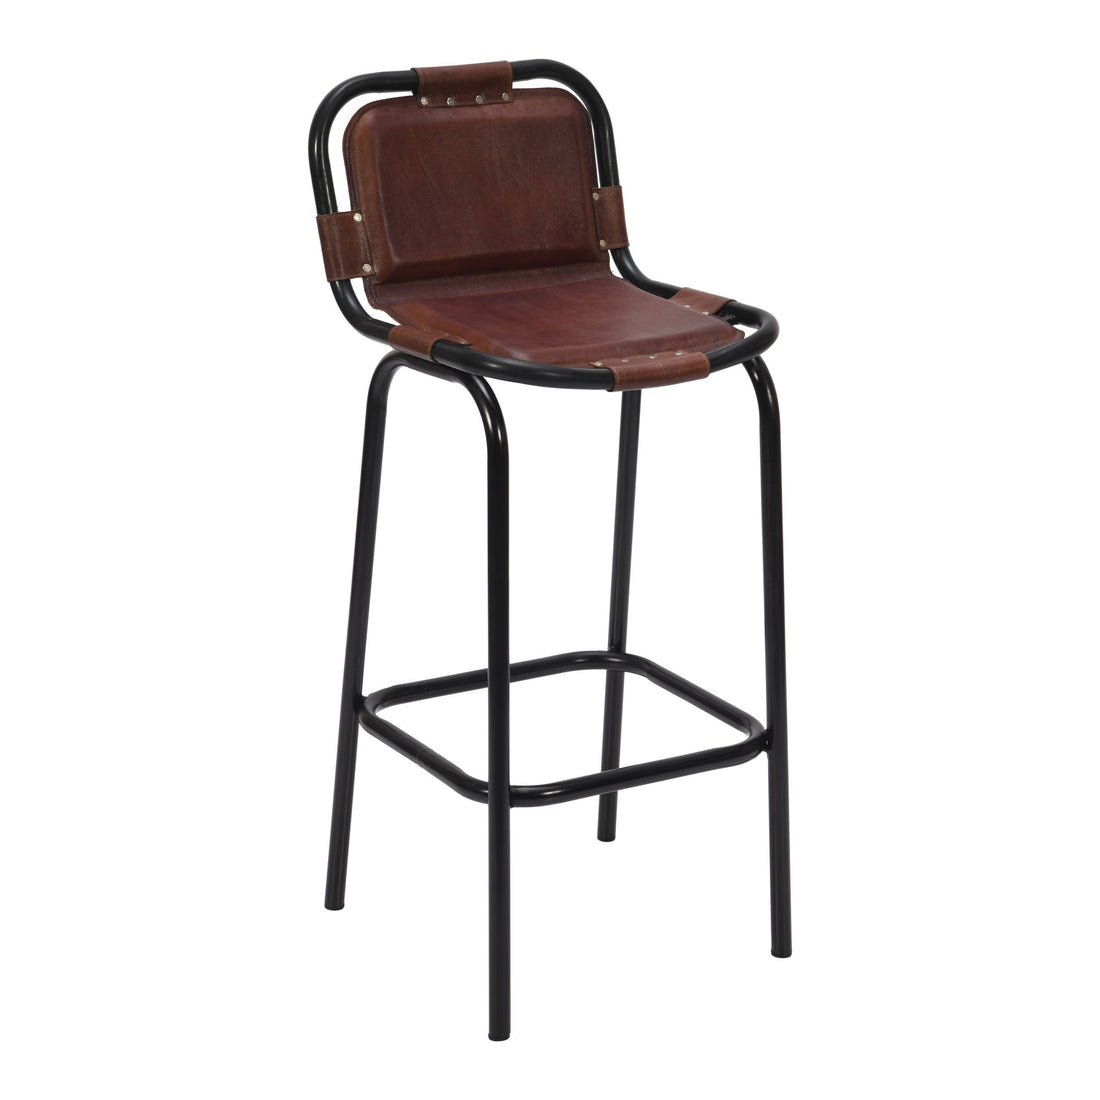 31 Inch Bar Height Chair, Genuine Leather